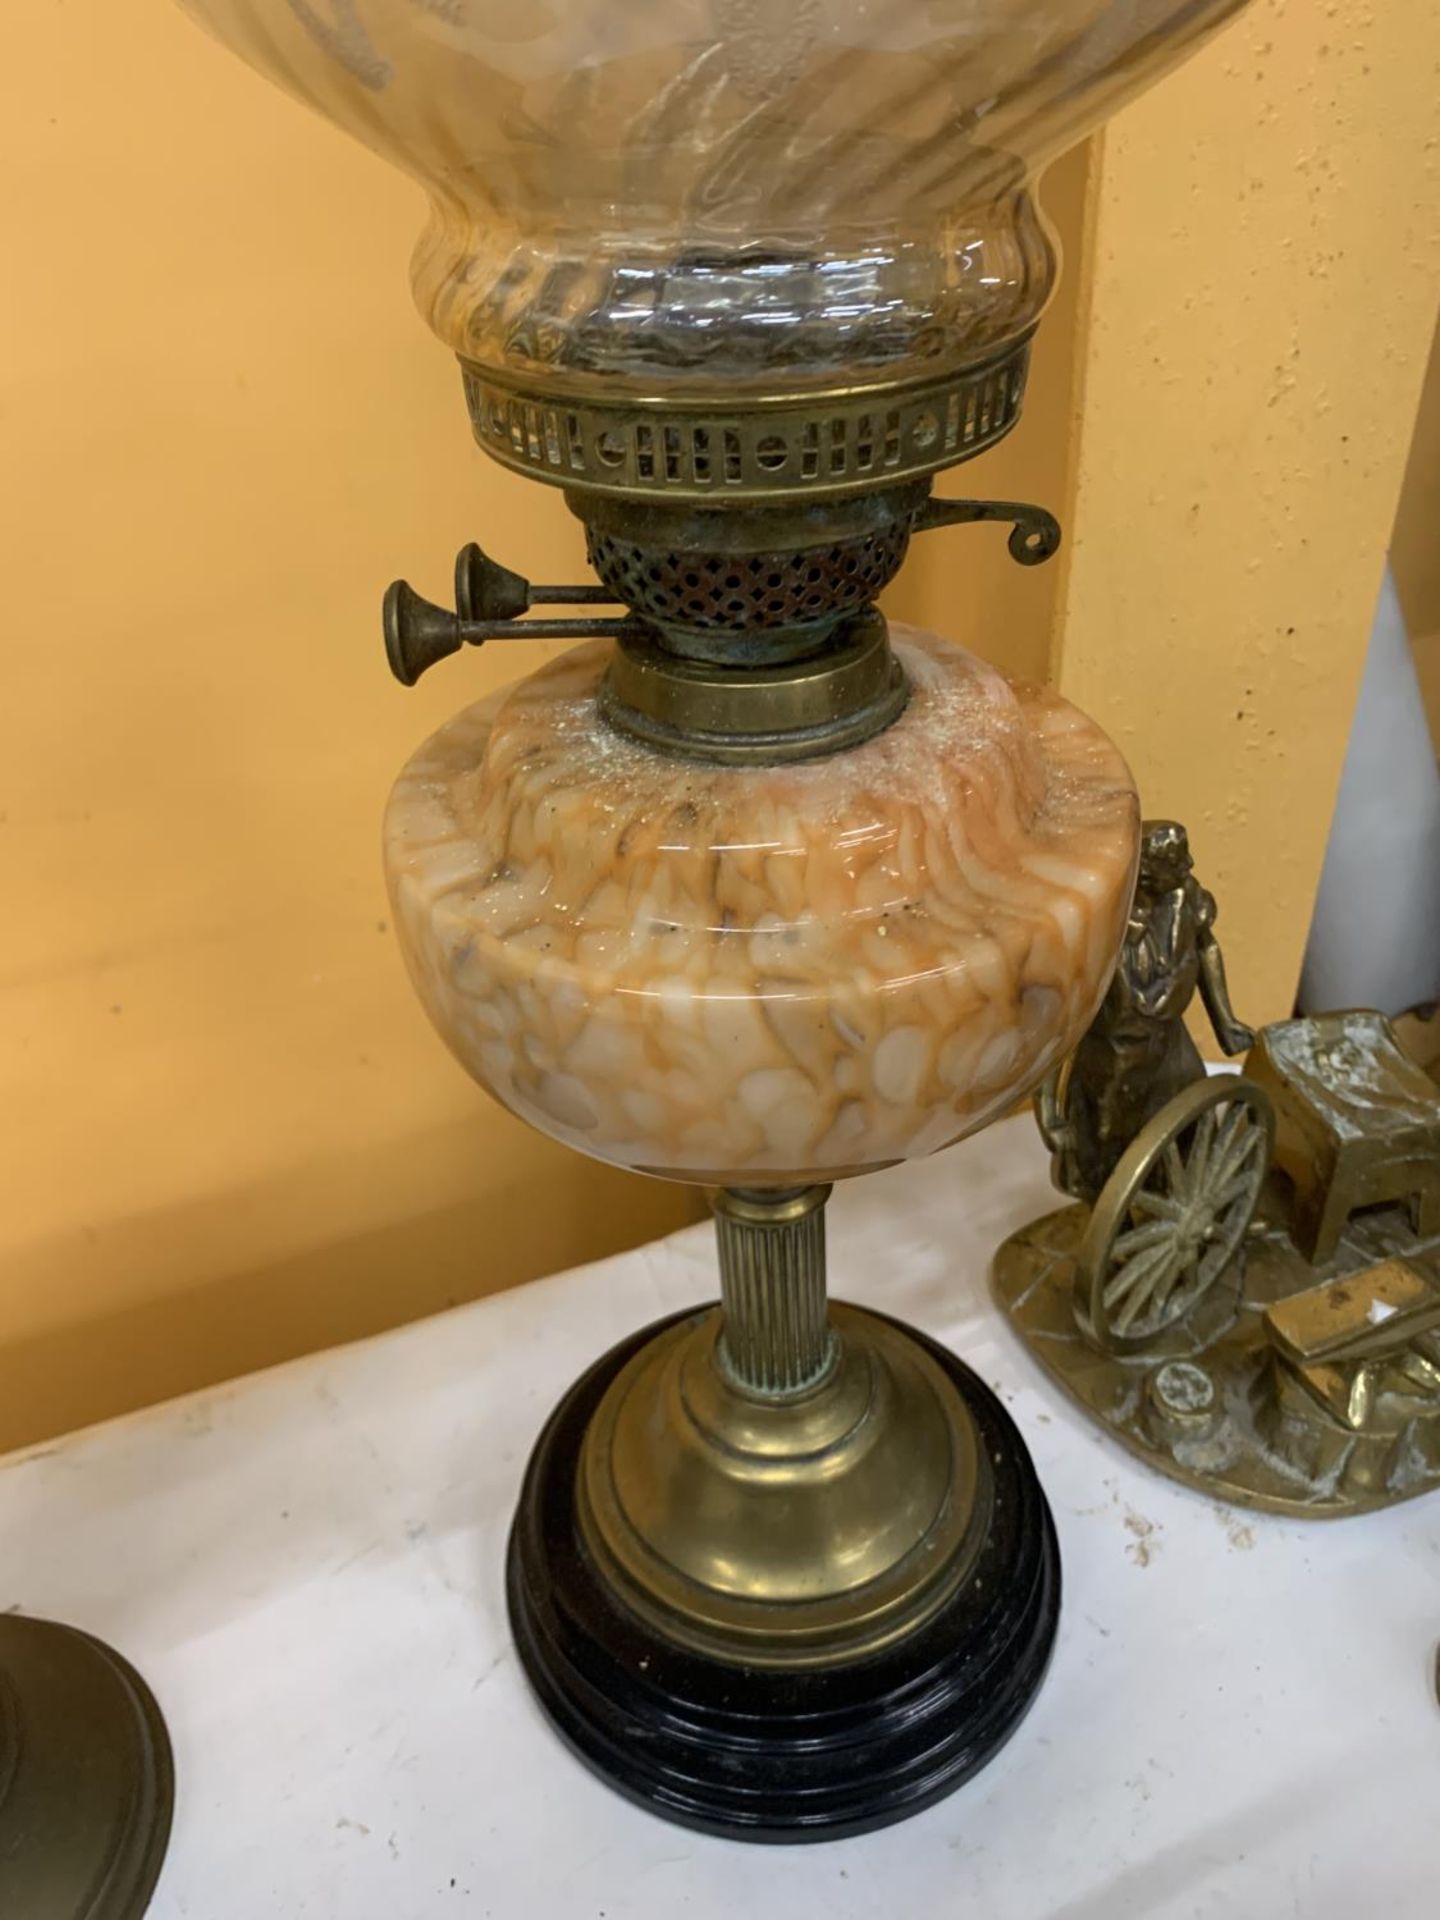 A VICTORIAN OIL LAMP WITH A BRASS STEM, MARBLE MIDDLE, FLUTED AND ETCHED SHADE AND CHIMNEY HEIGHT - Image 3 of 3